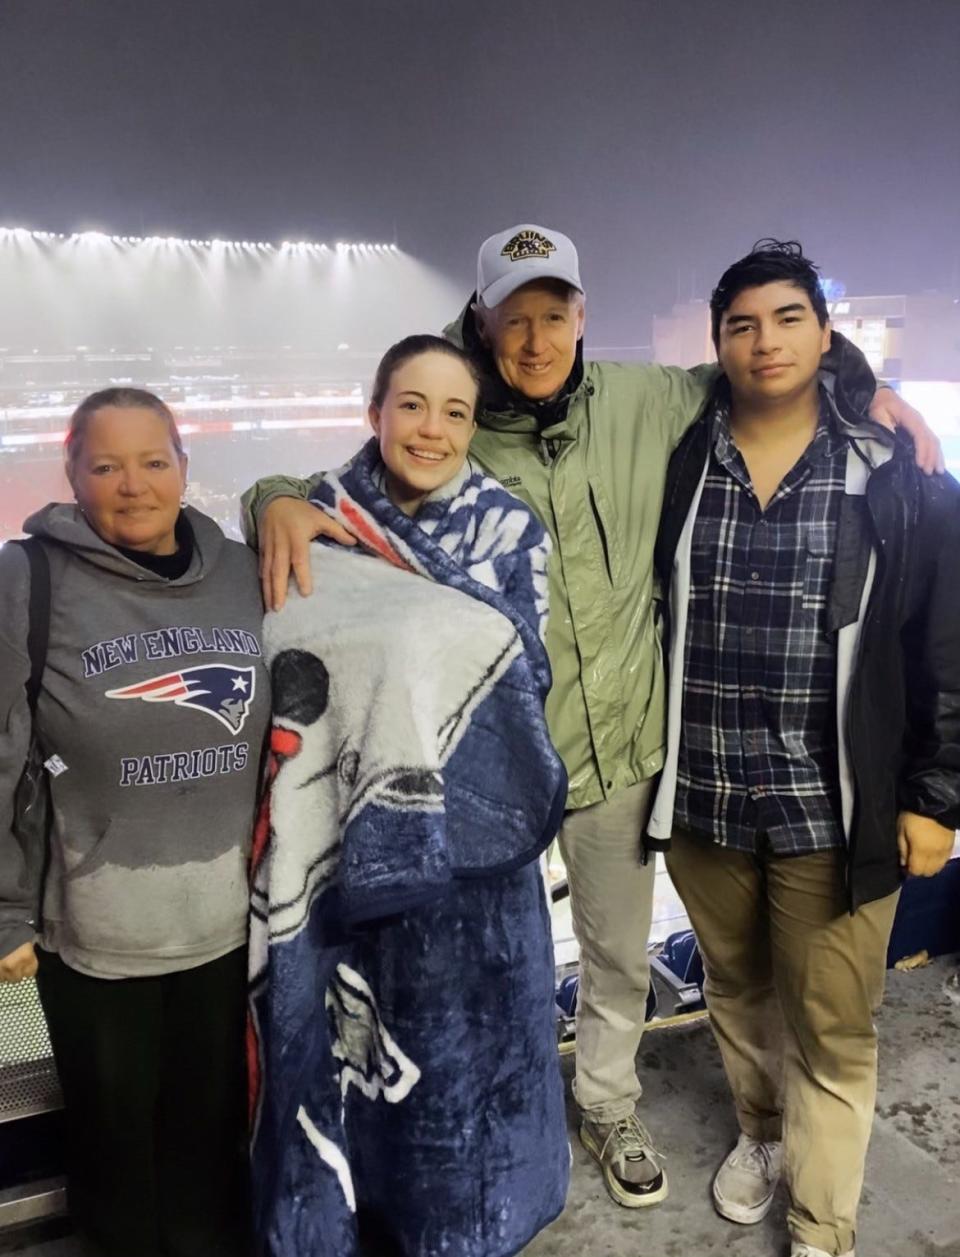 The Duffy family caught Tampa Bay Buccaneers quarterback Tom Brady's return to his old Patriots stomping ground at Gillette Stadium in Foxboro, Massachusetts, in October 2021. One year later, Kate Duffy, left, would be diagnosed with pancreatic cancer.